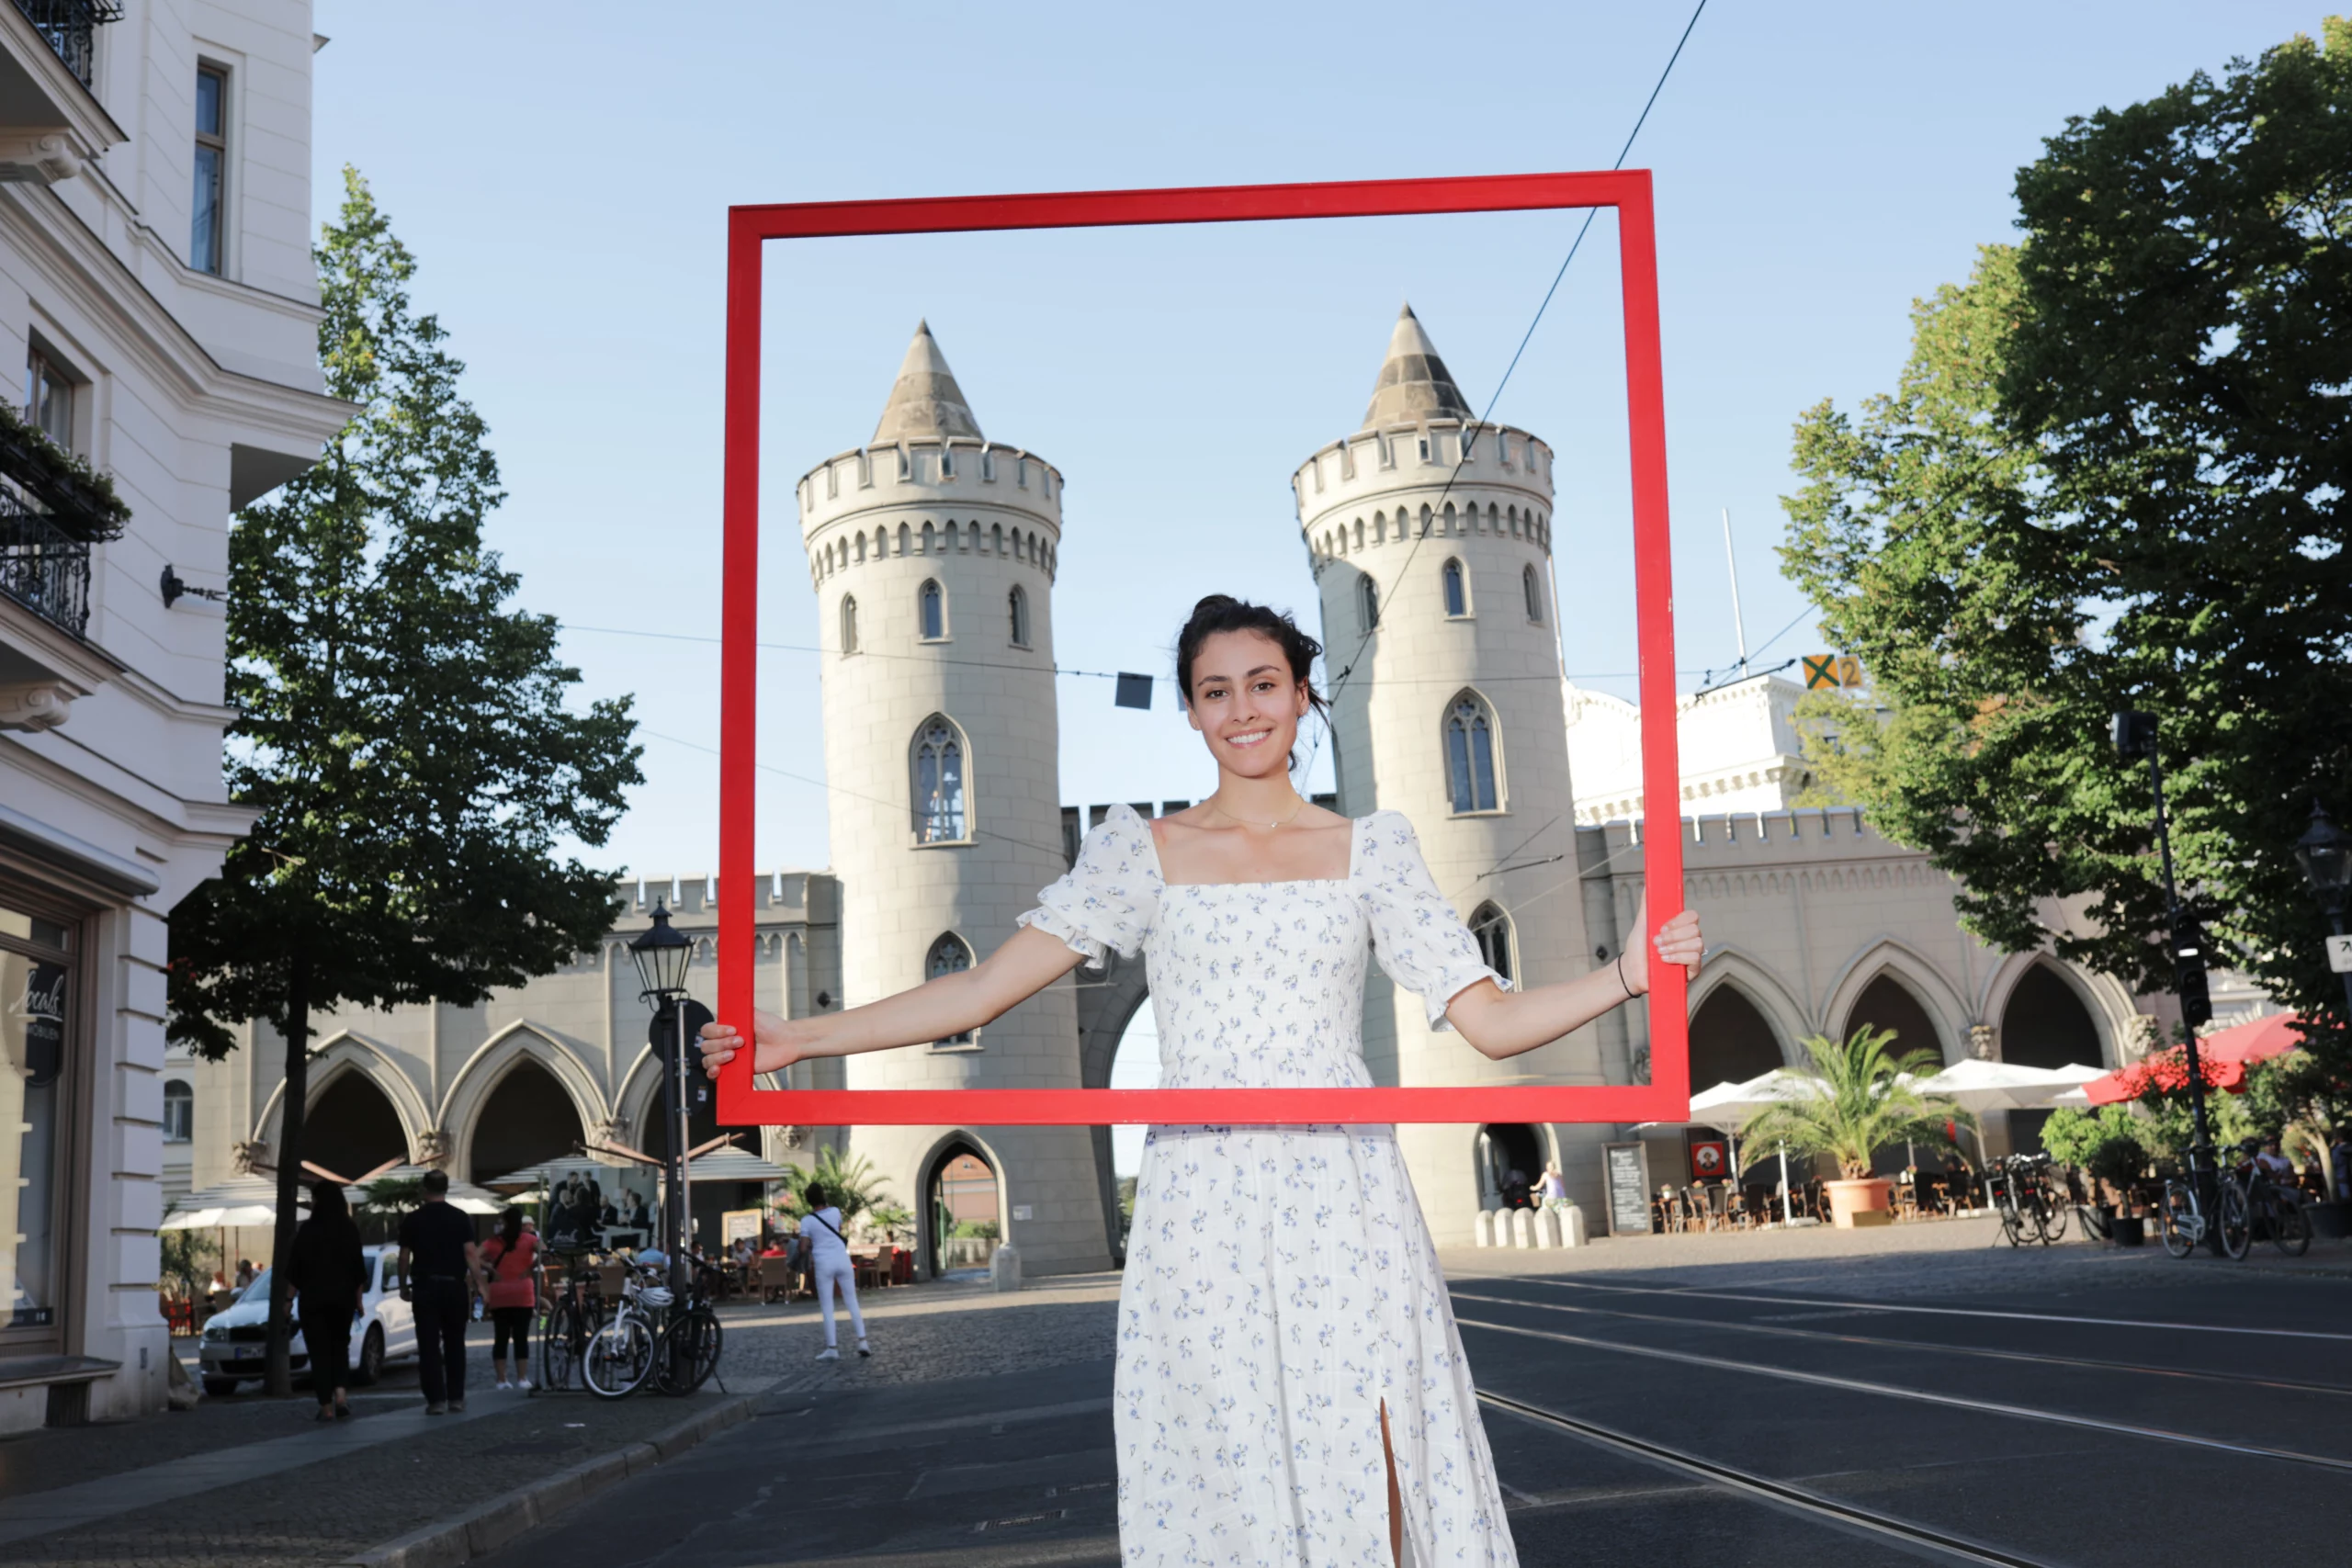 One picture shows a young woman in a red picture frame on the Day of German Unity in Berlin.